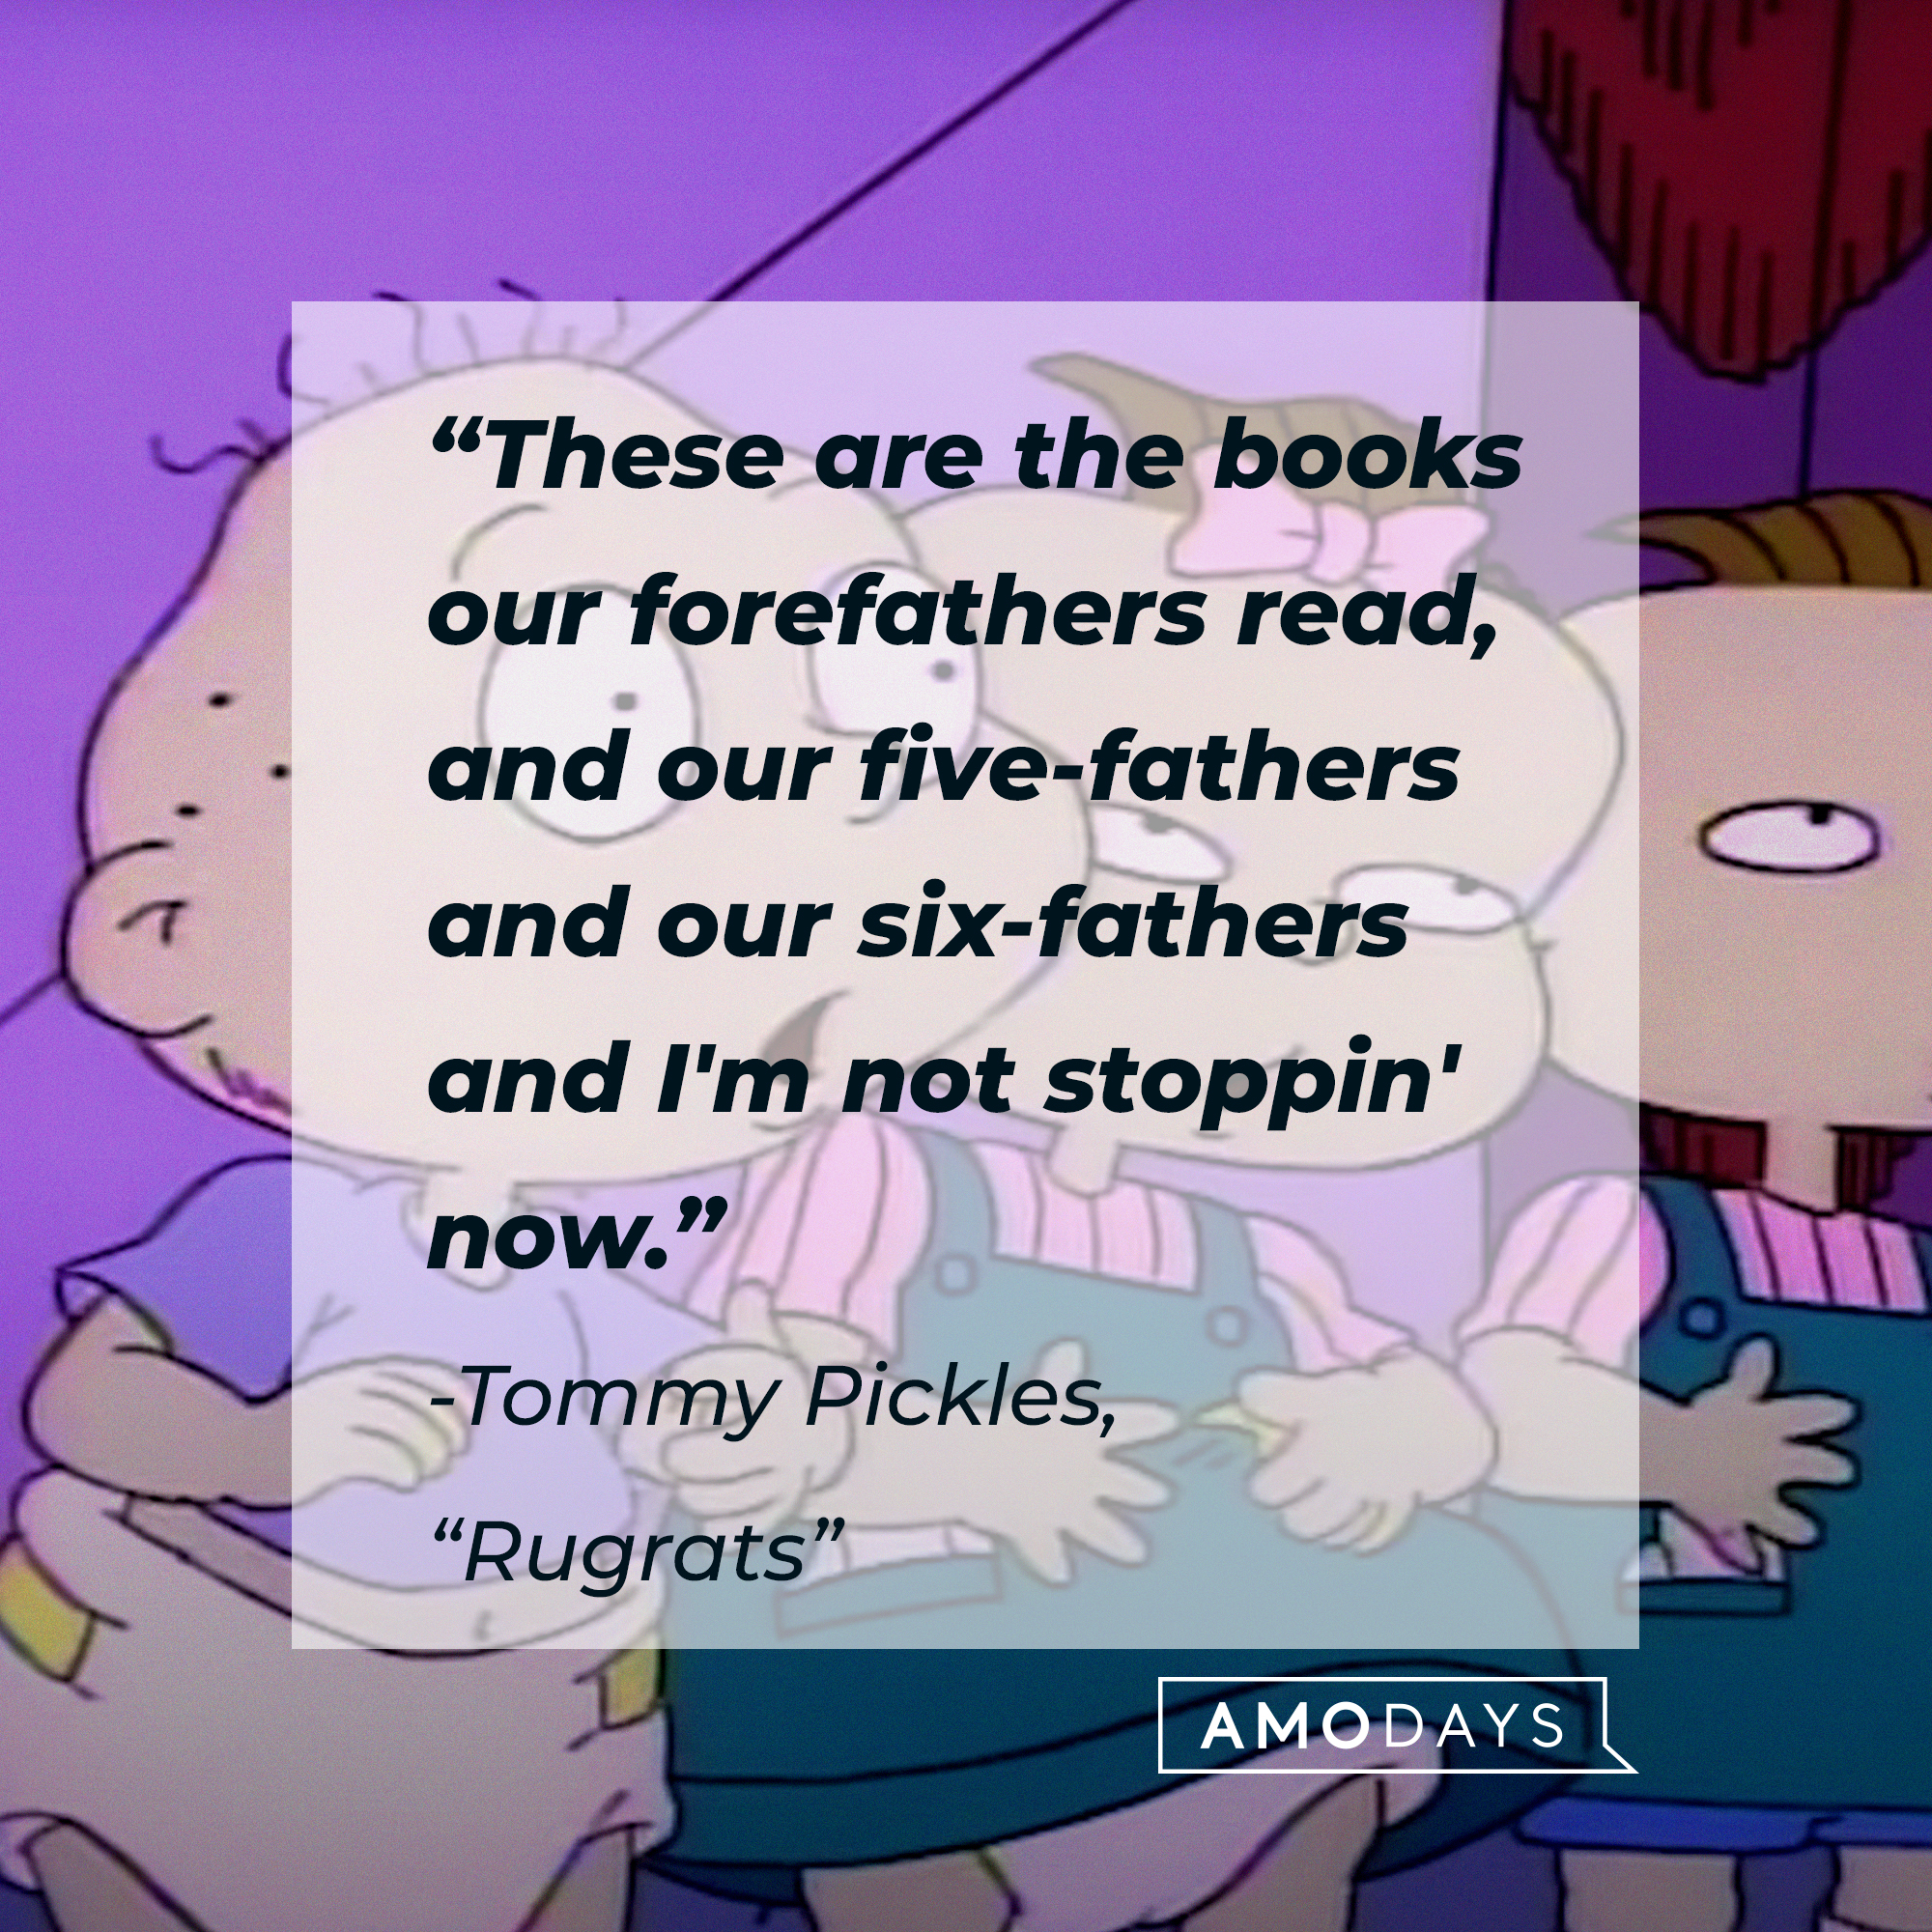 Tommy Pickles' and his quote: “These are the books our forefathers read, and our five-fathers and our six-fathers and I'm not stoppin' now.” | Source: Facebook.com/Rugrats